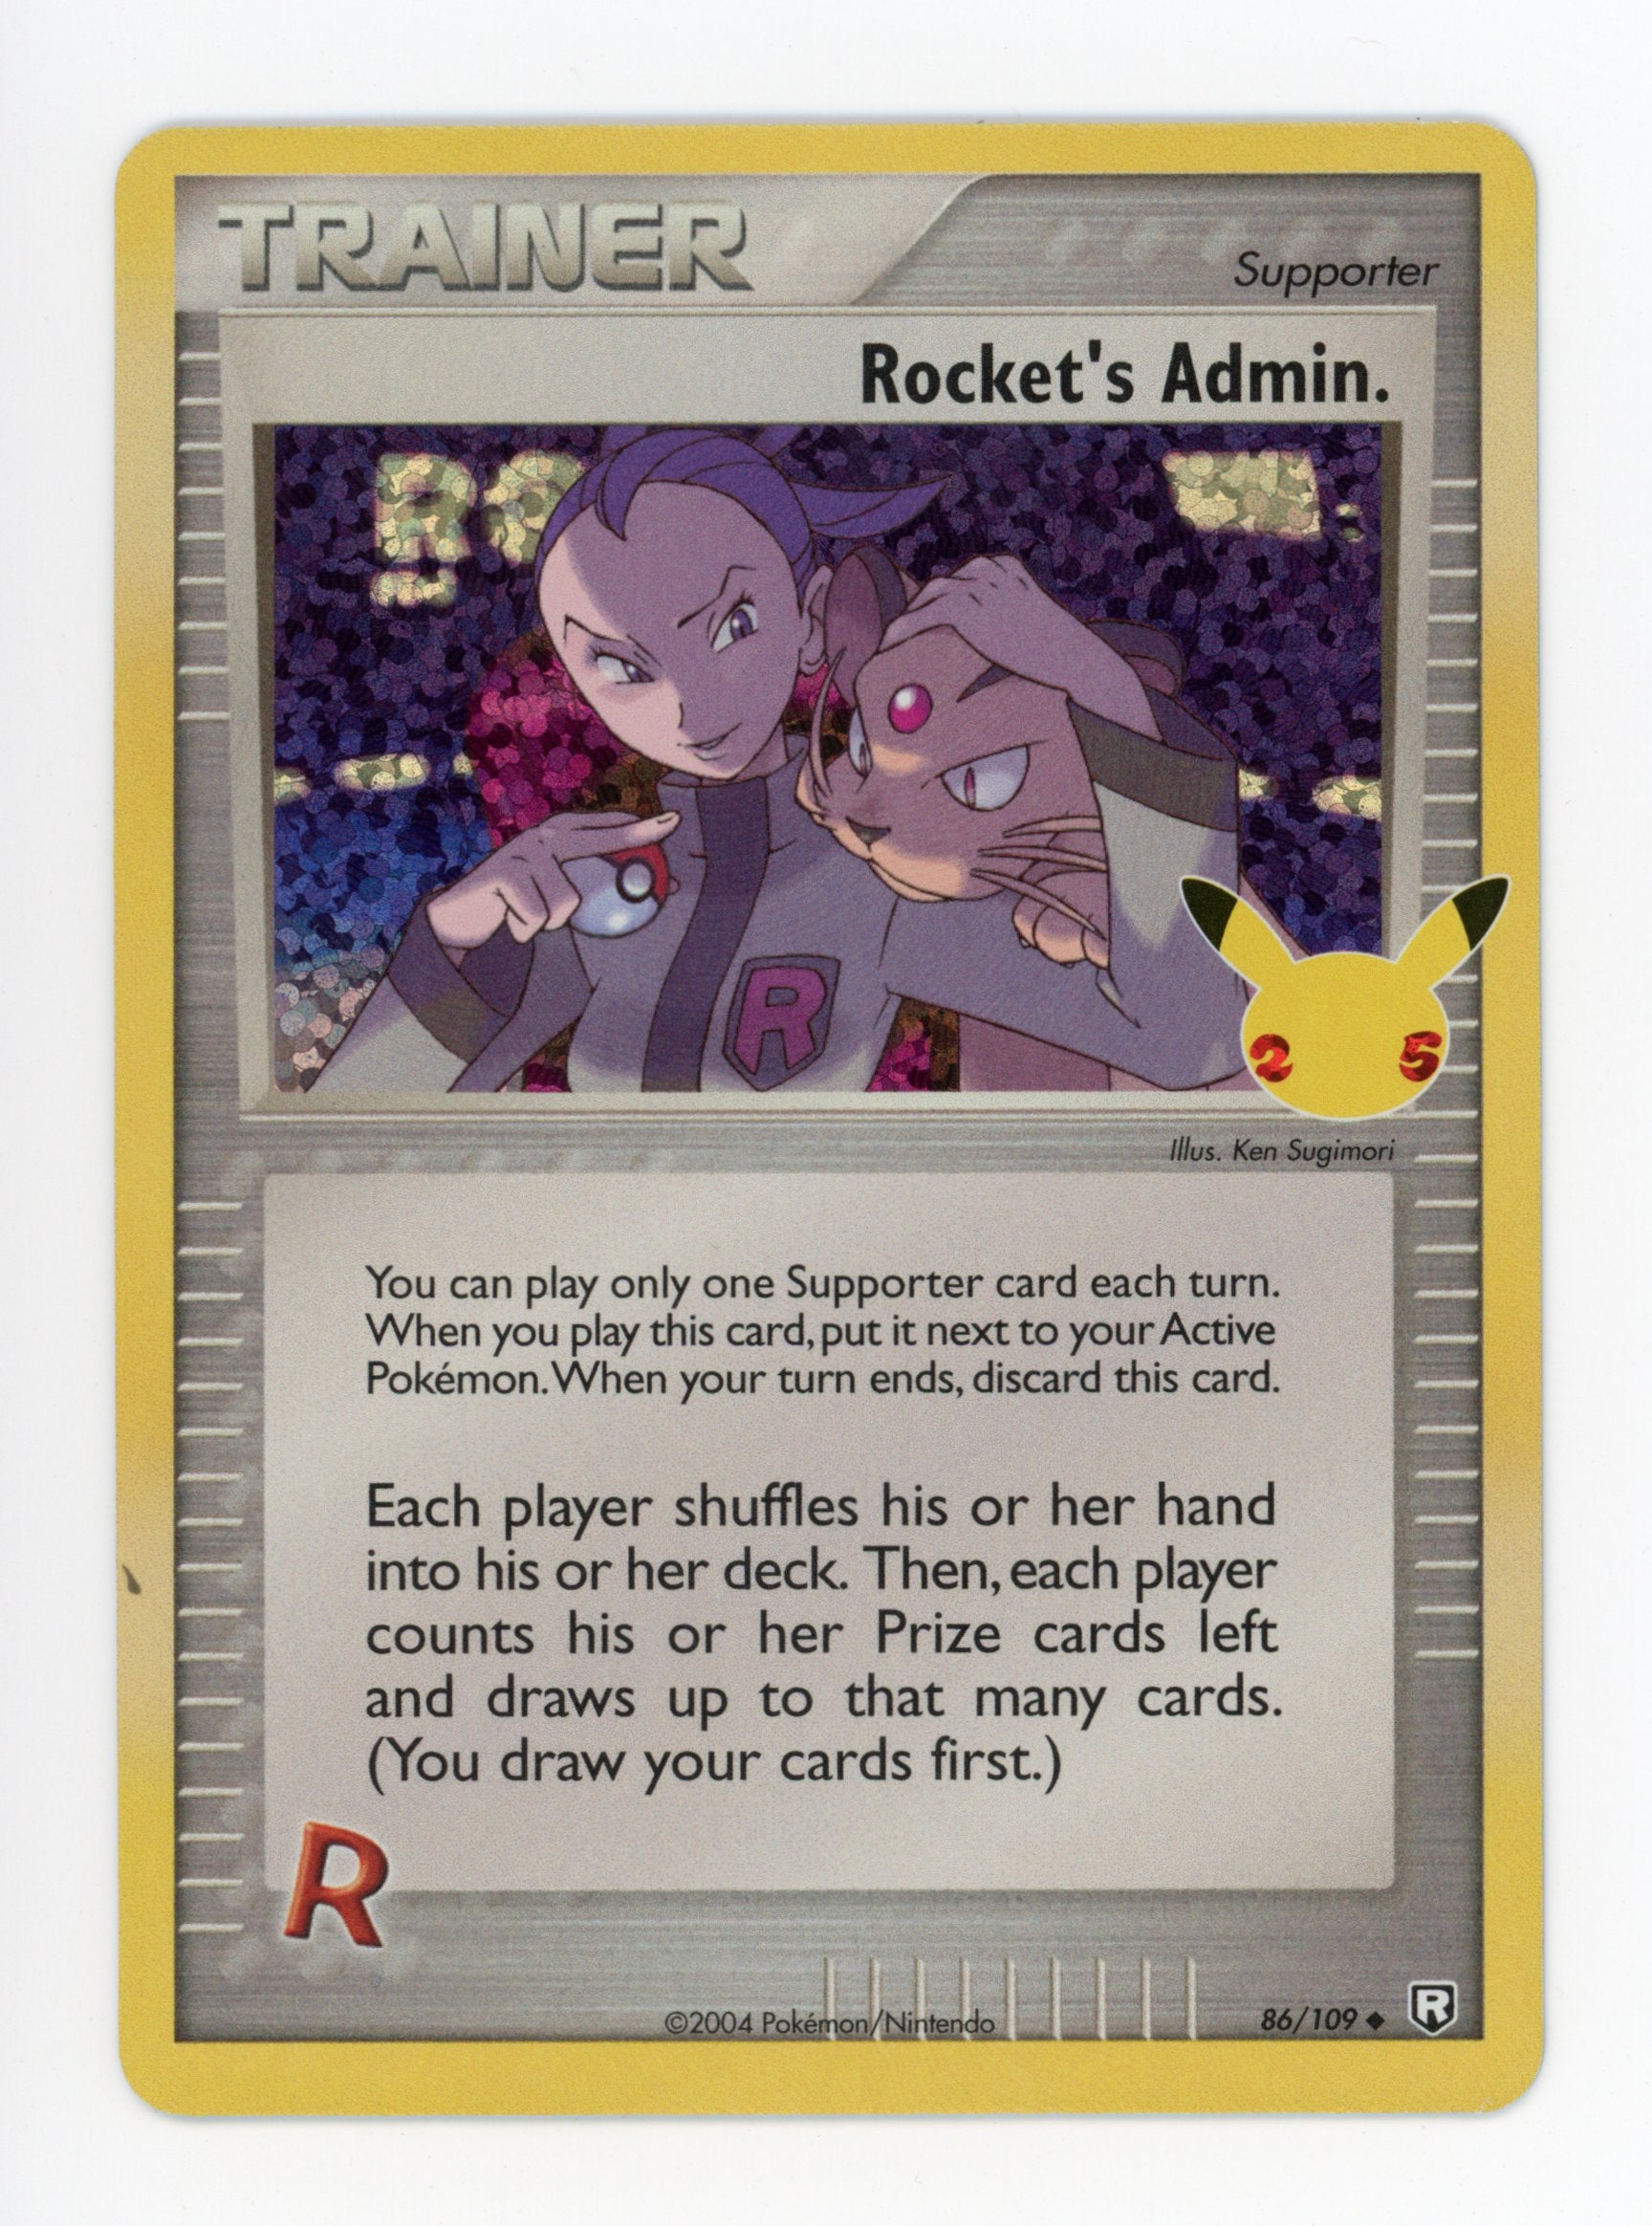 Here are some of my favorite Pokémon cards in my collection : r